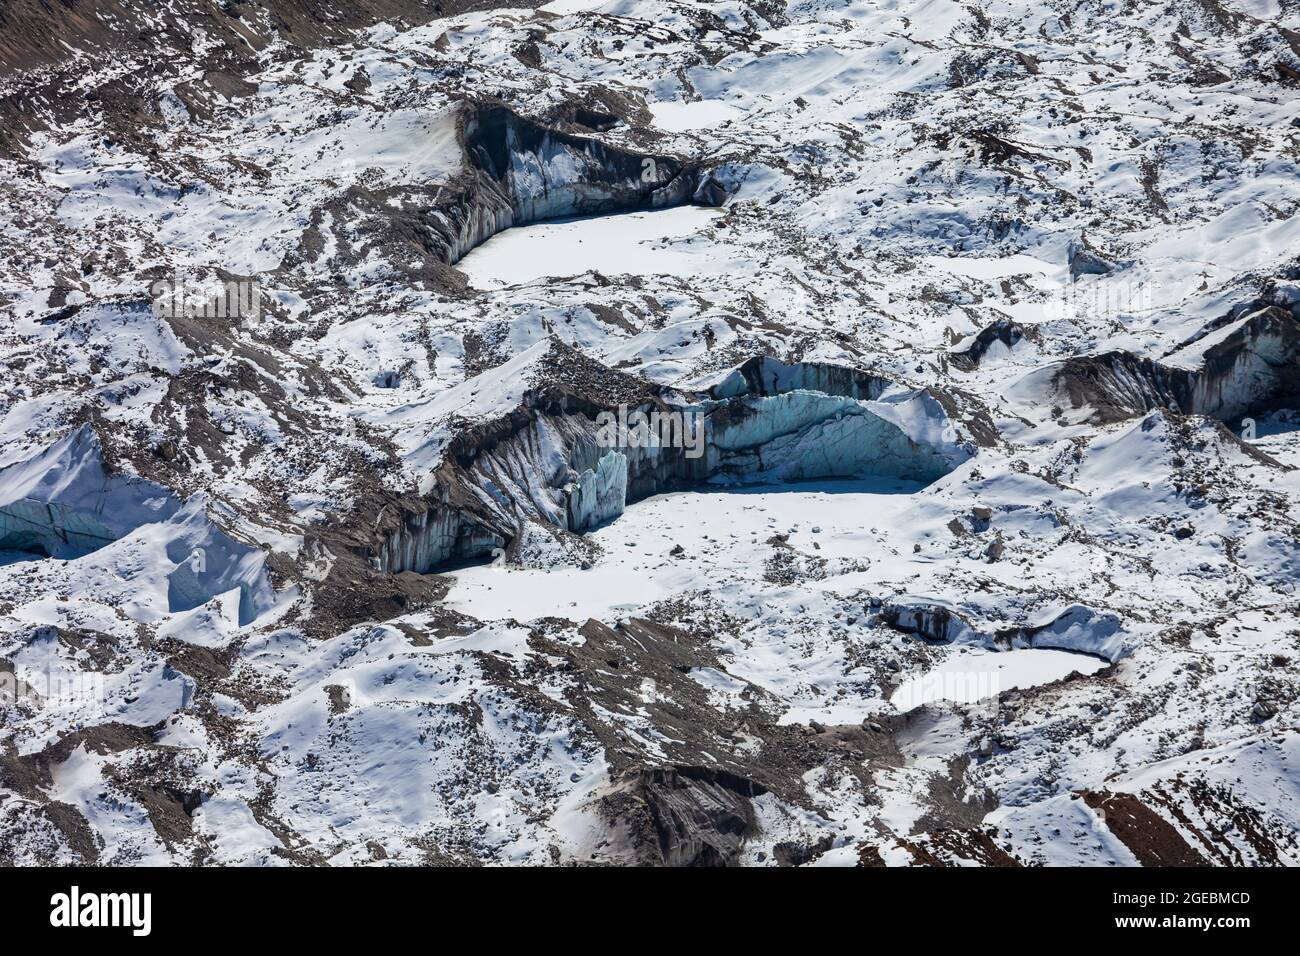 Khumbu glacier at the foot of Everest mountain in Everest region in Himalaya, Nepal Stock Photo